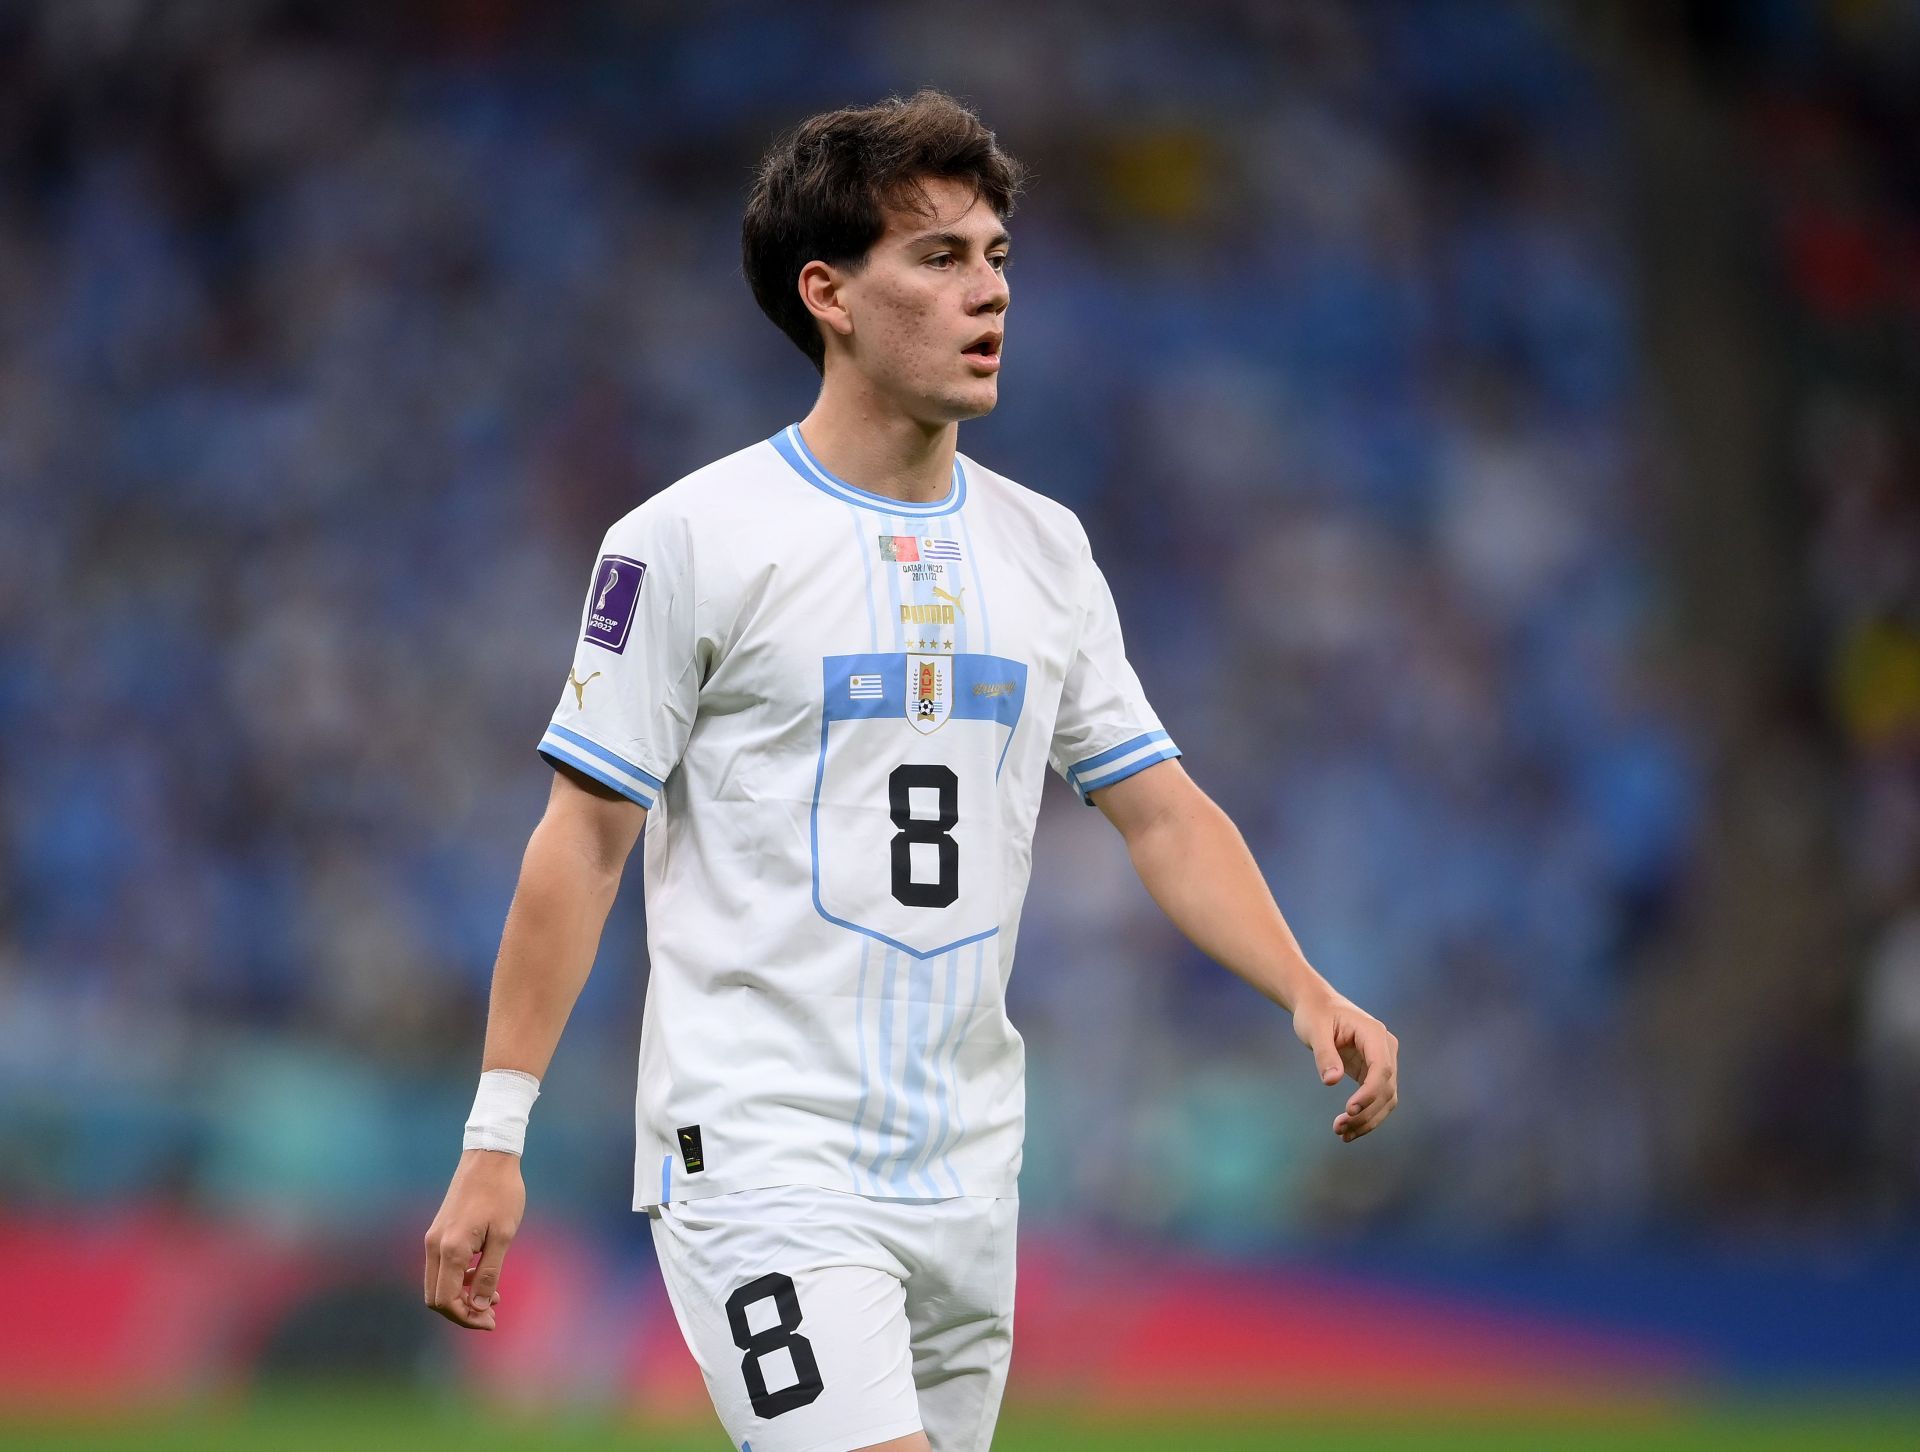 The Manchester United forward represented Uruguay at the 2022 FIFA World Cup in Qatar.